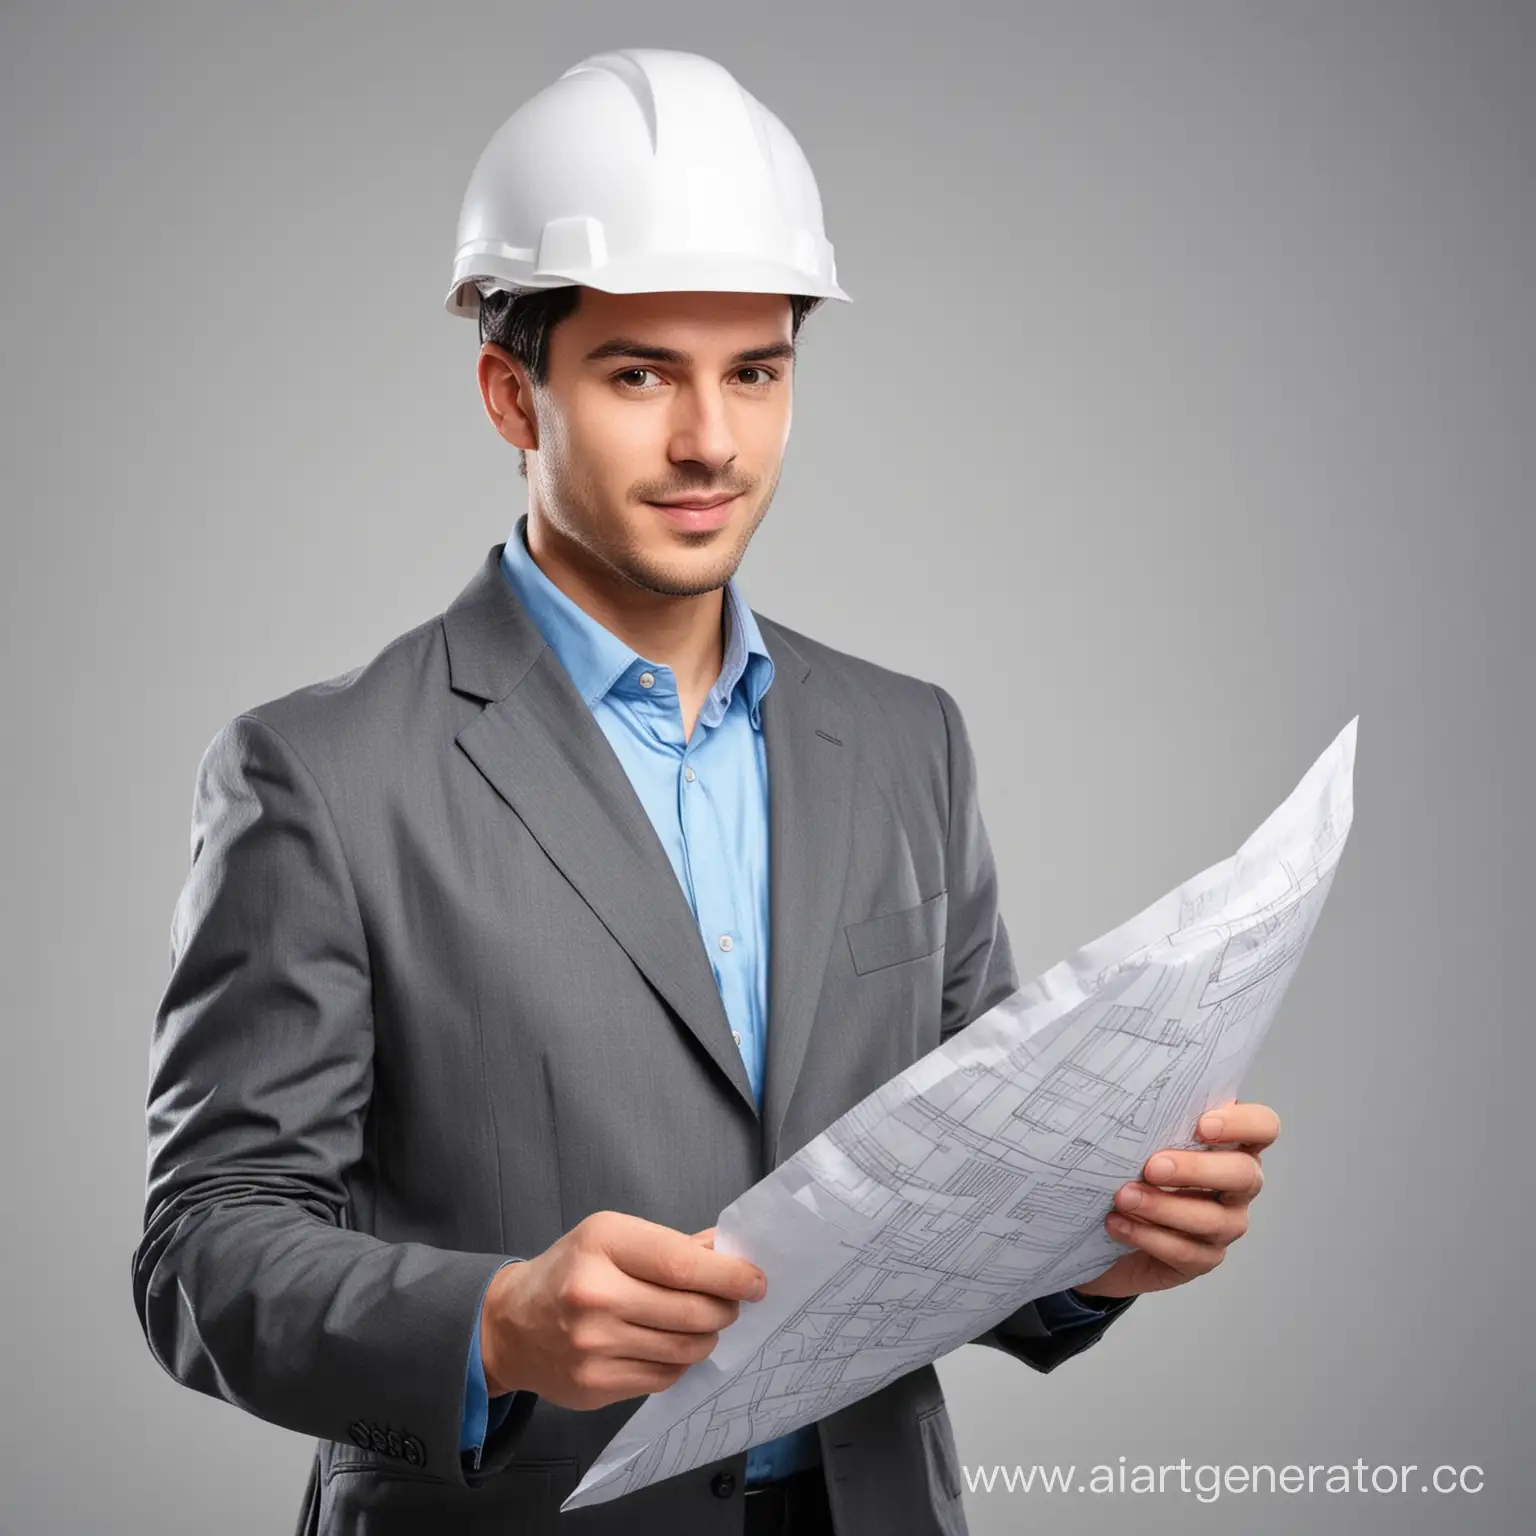 Male-Engineer-Wearing-Helmet-with-Blueprint-on-Gray-Background